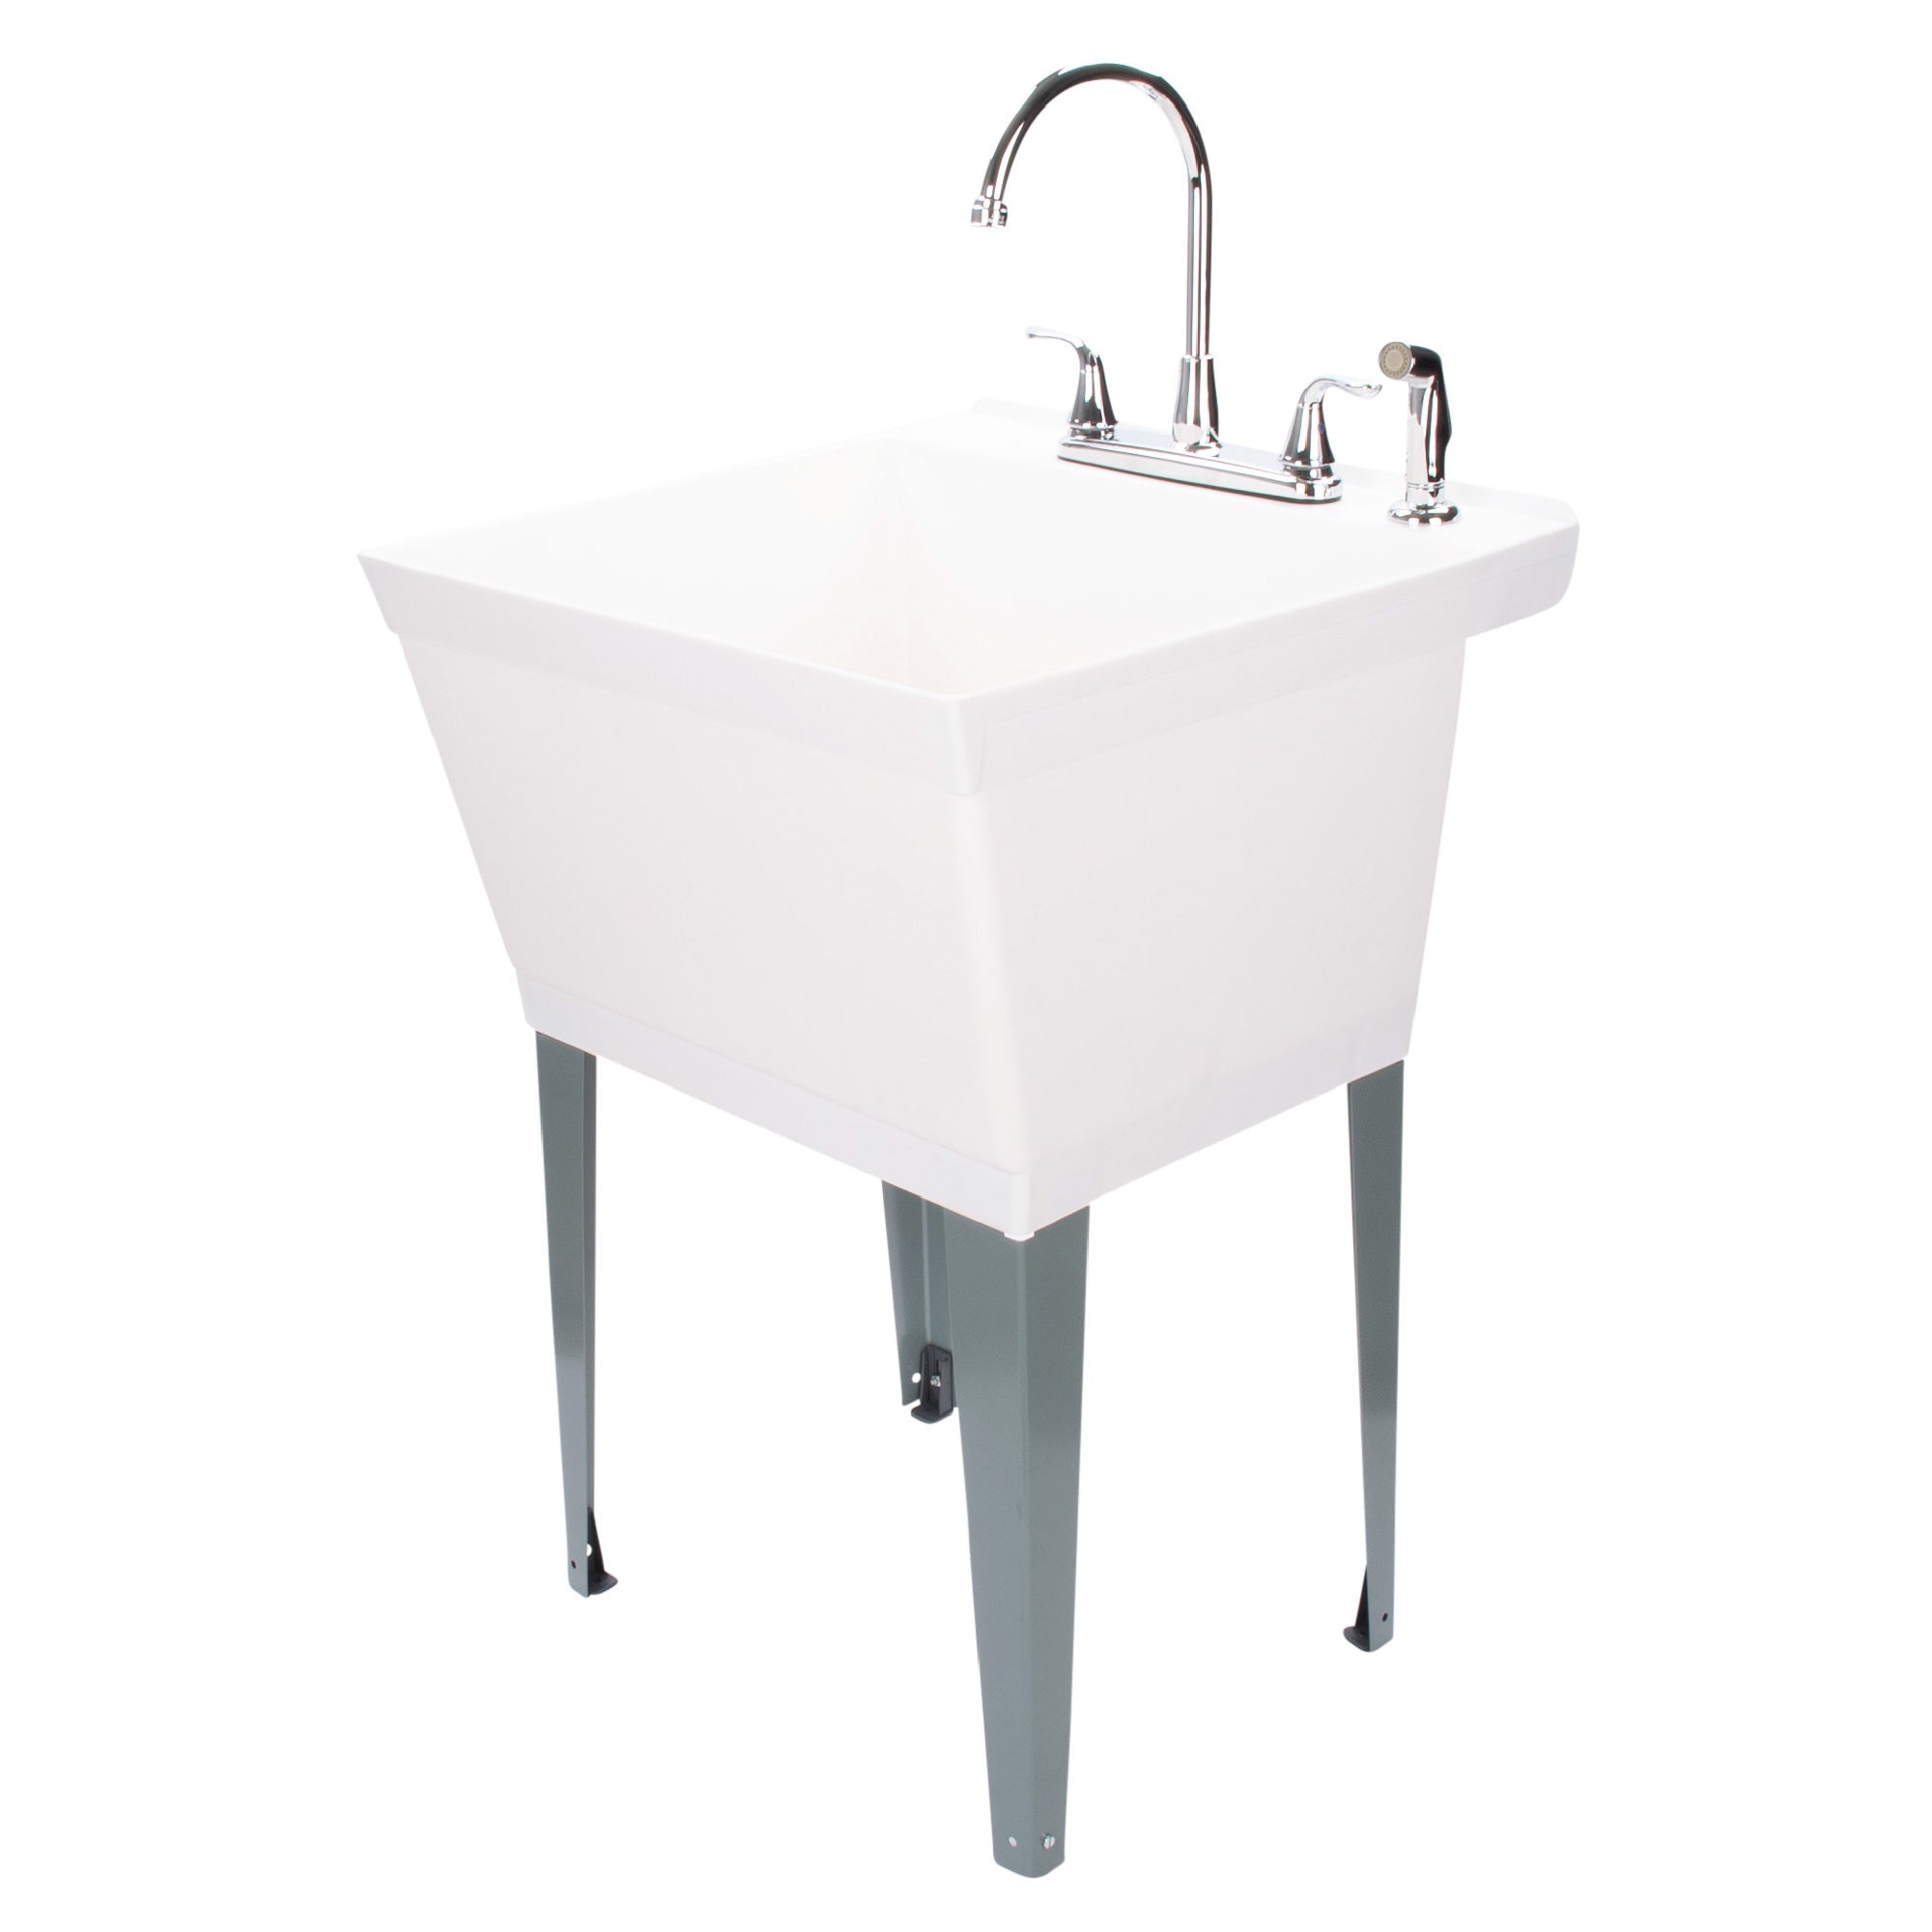 Tehila Standard Freestanding White Utility Sink with Grey Legs and Chrome  Finish Wide-set Gooseneck Faucet with Side Sprayer